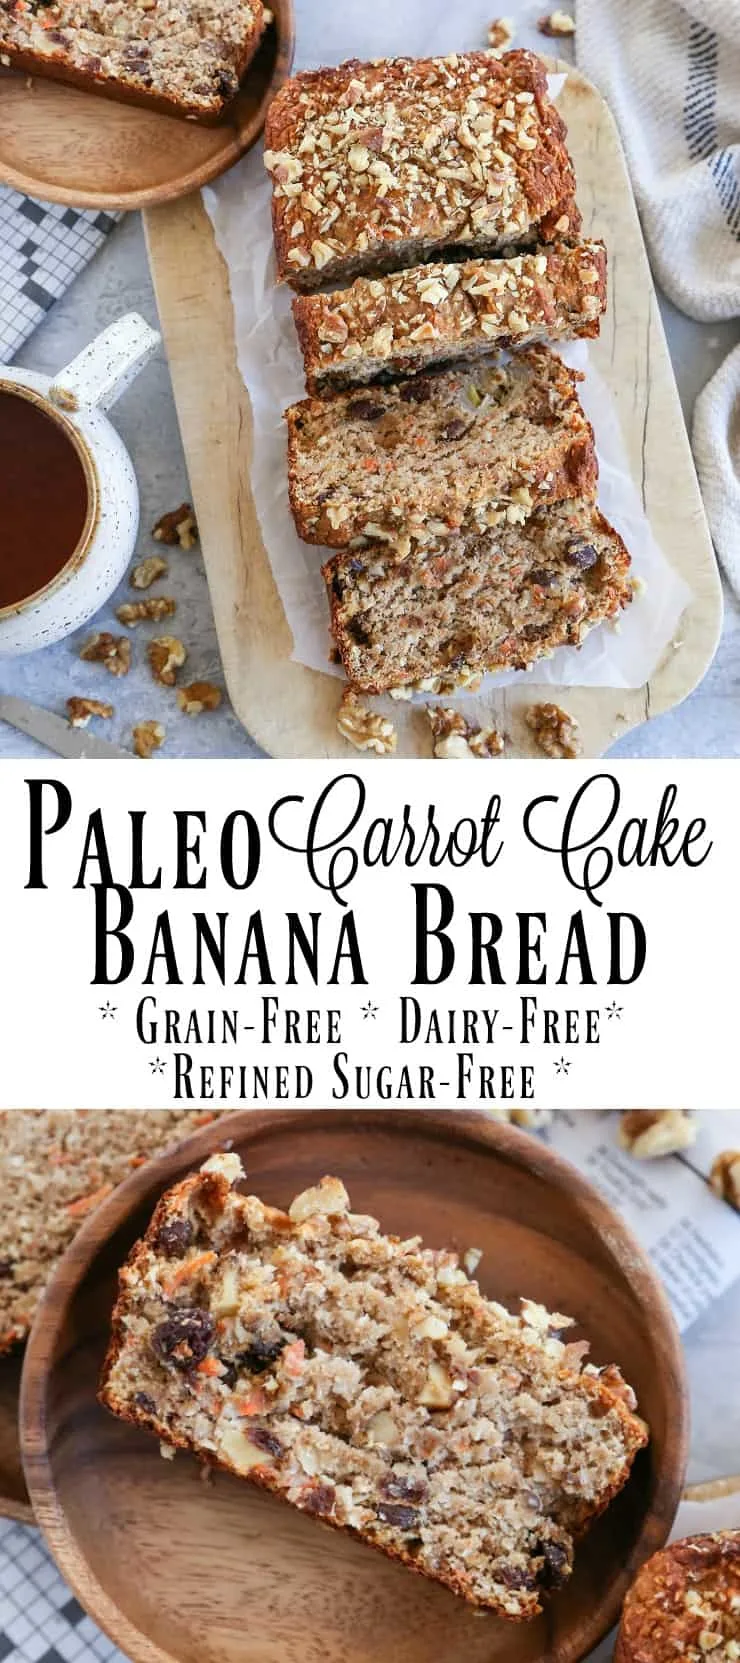 Paleo Carrot Cake Banana Bread - a unique spin on banana bread - grain-free, refined sugar-free, dairy-free, and healthy